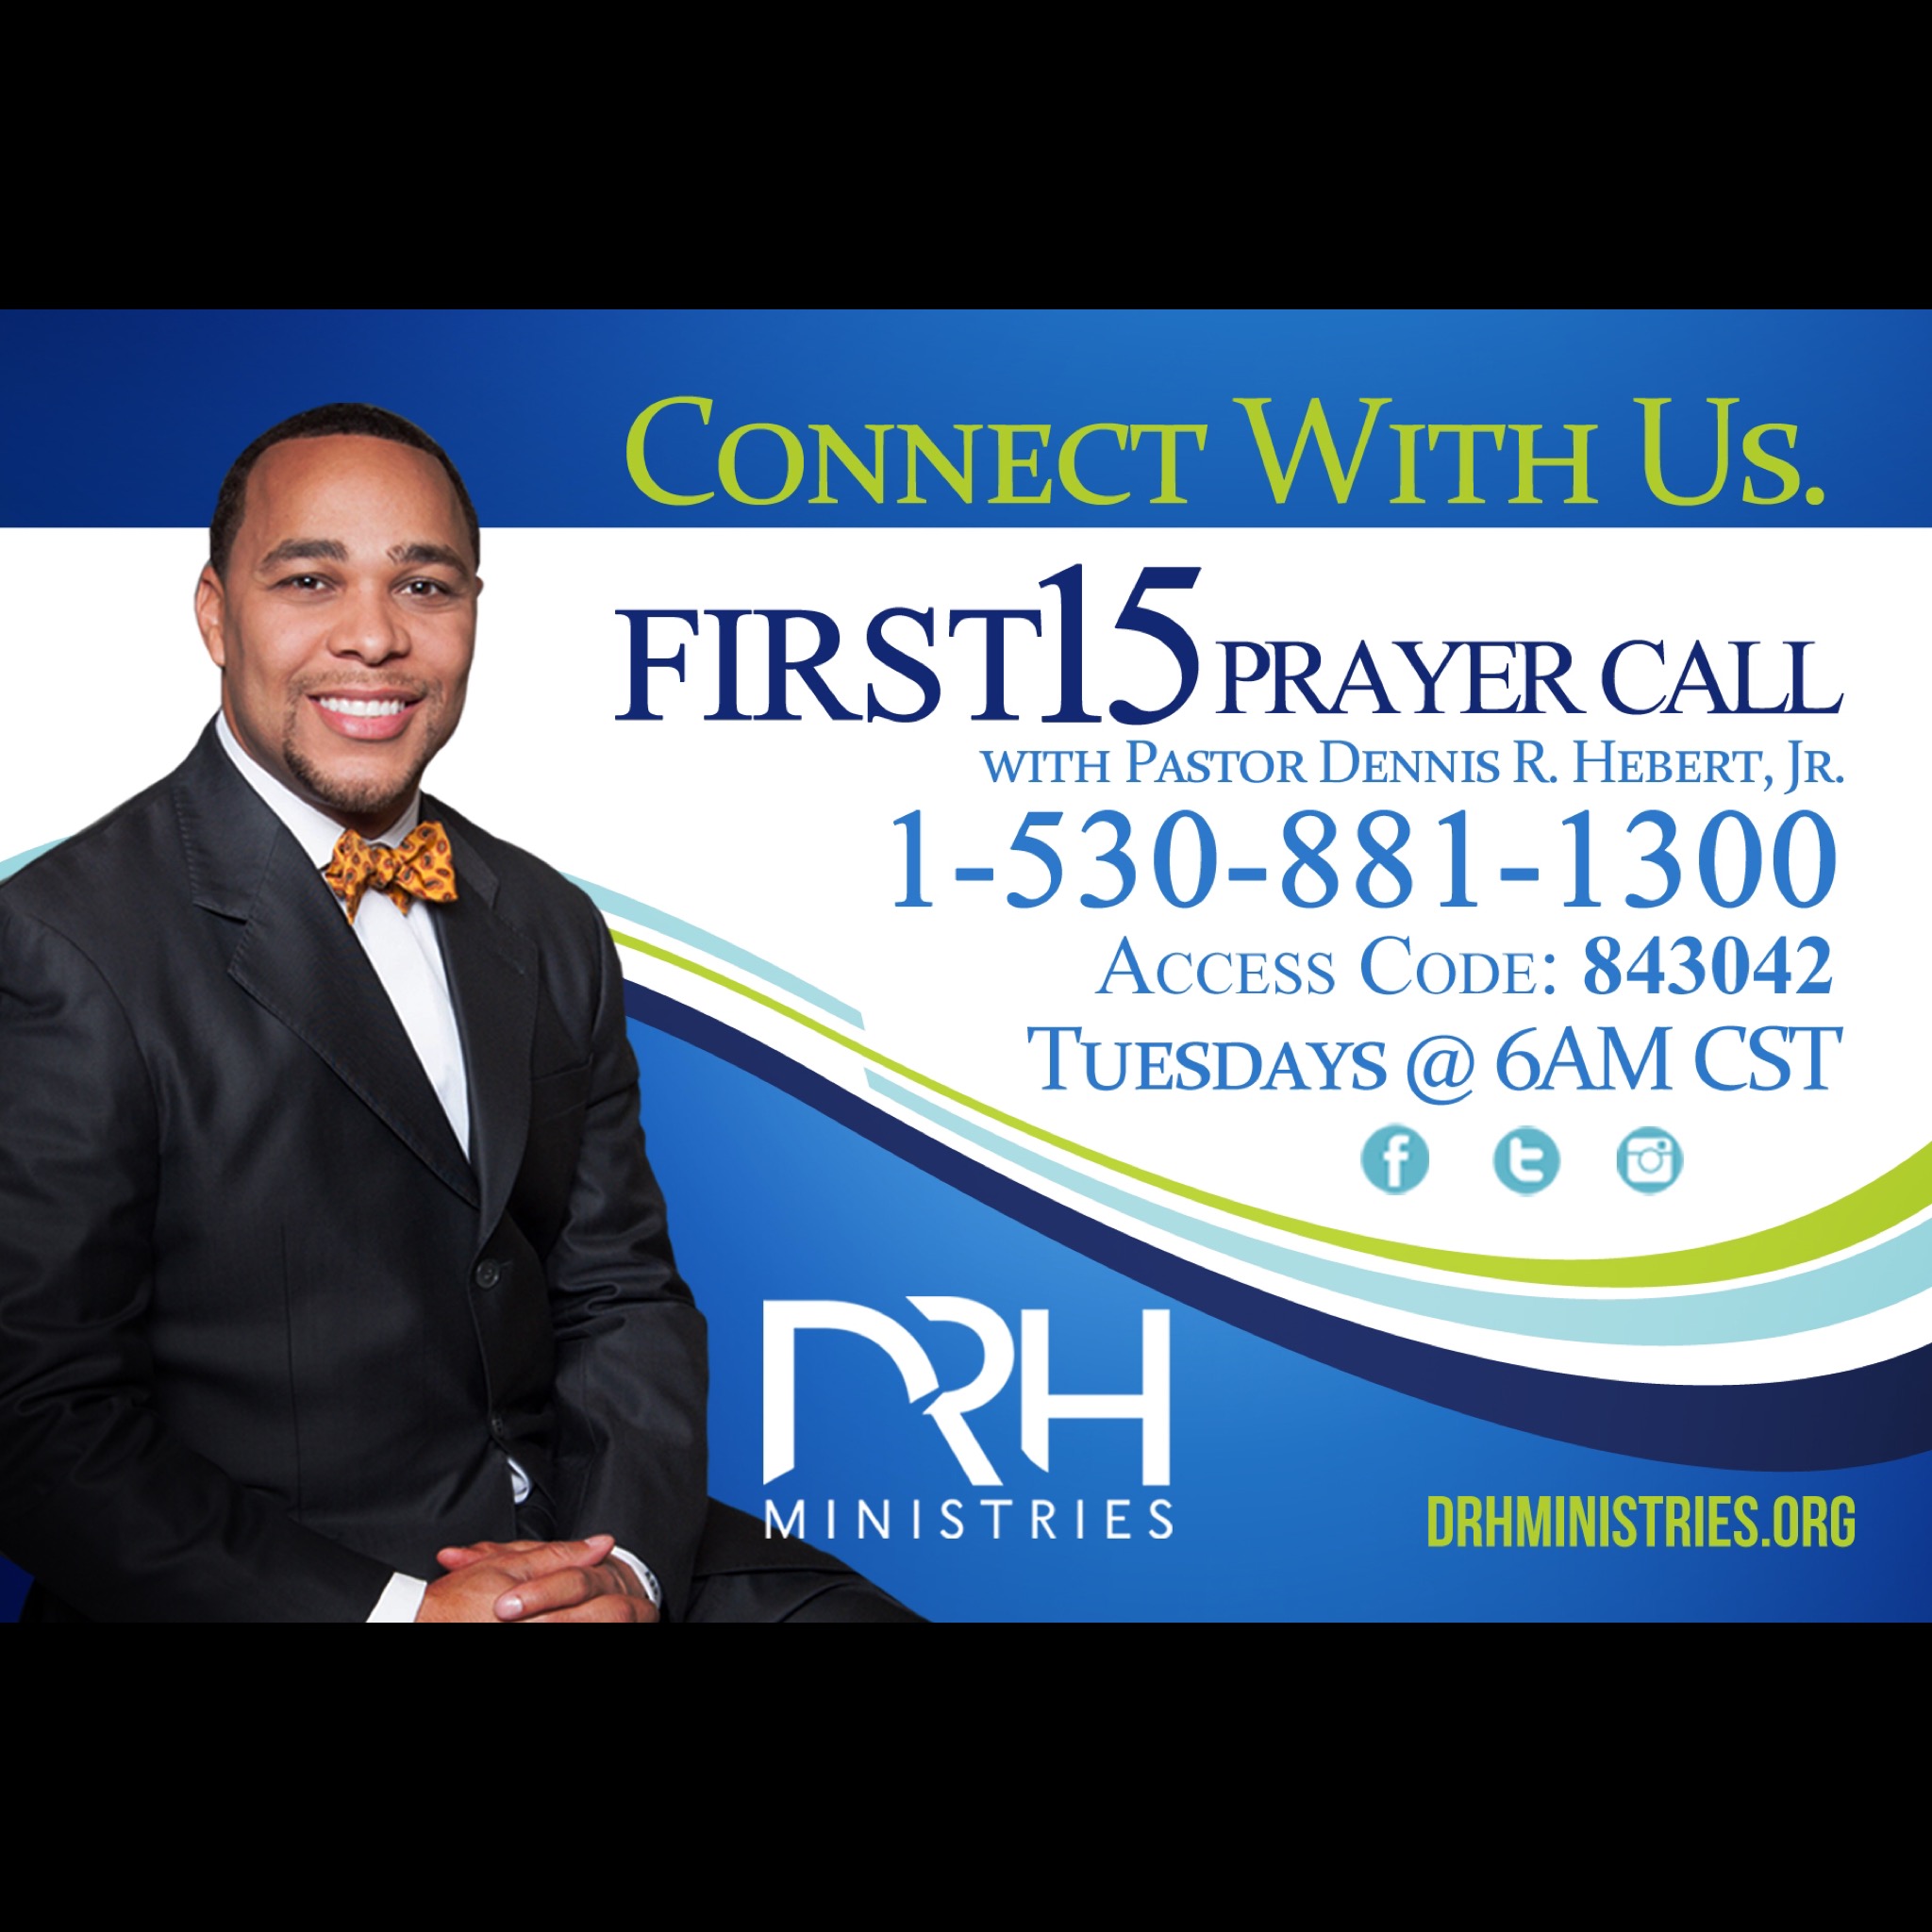 First 15 Prayer Call: It's In You